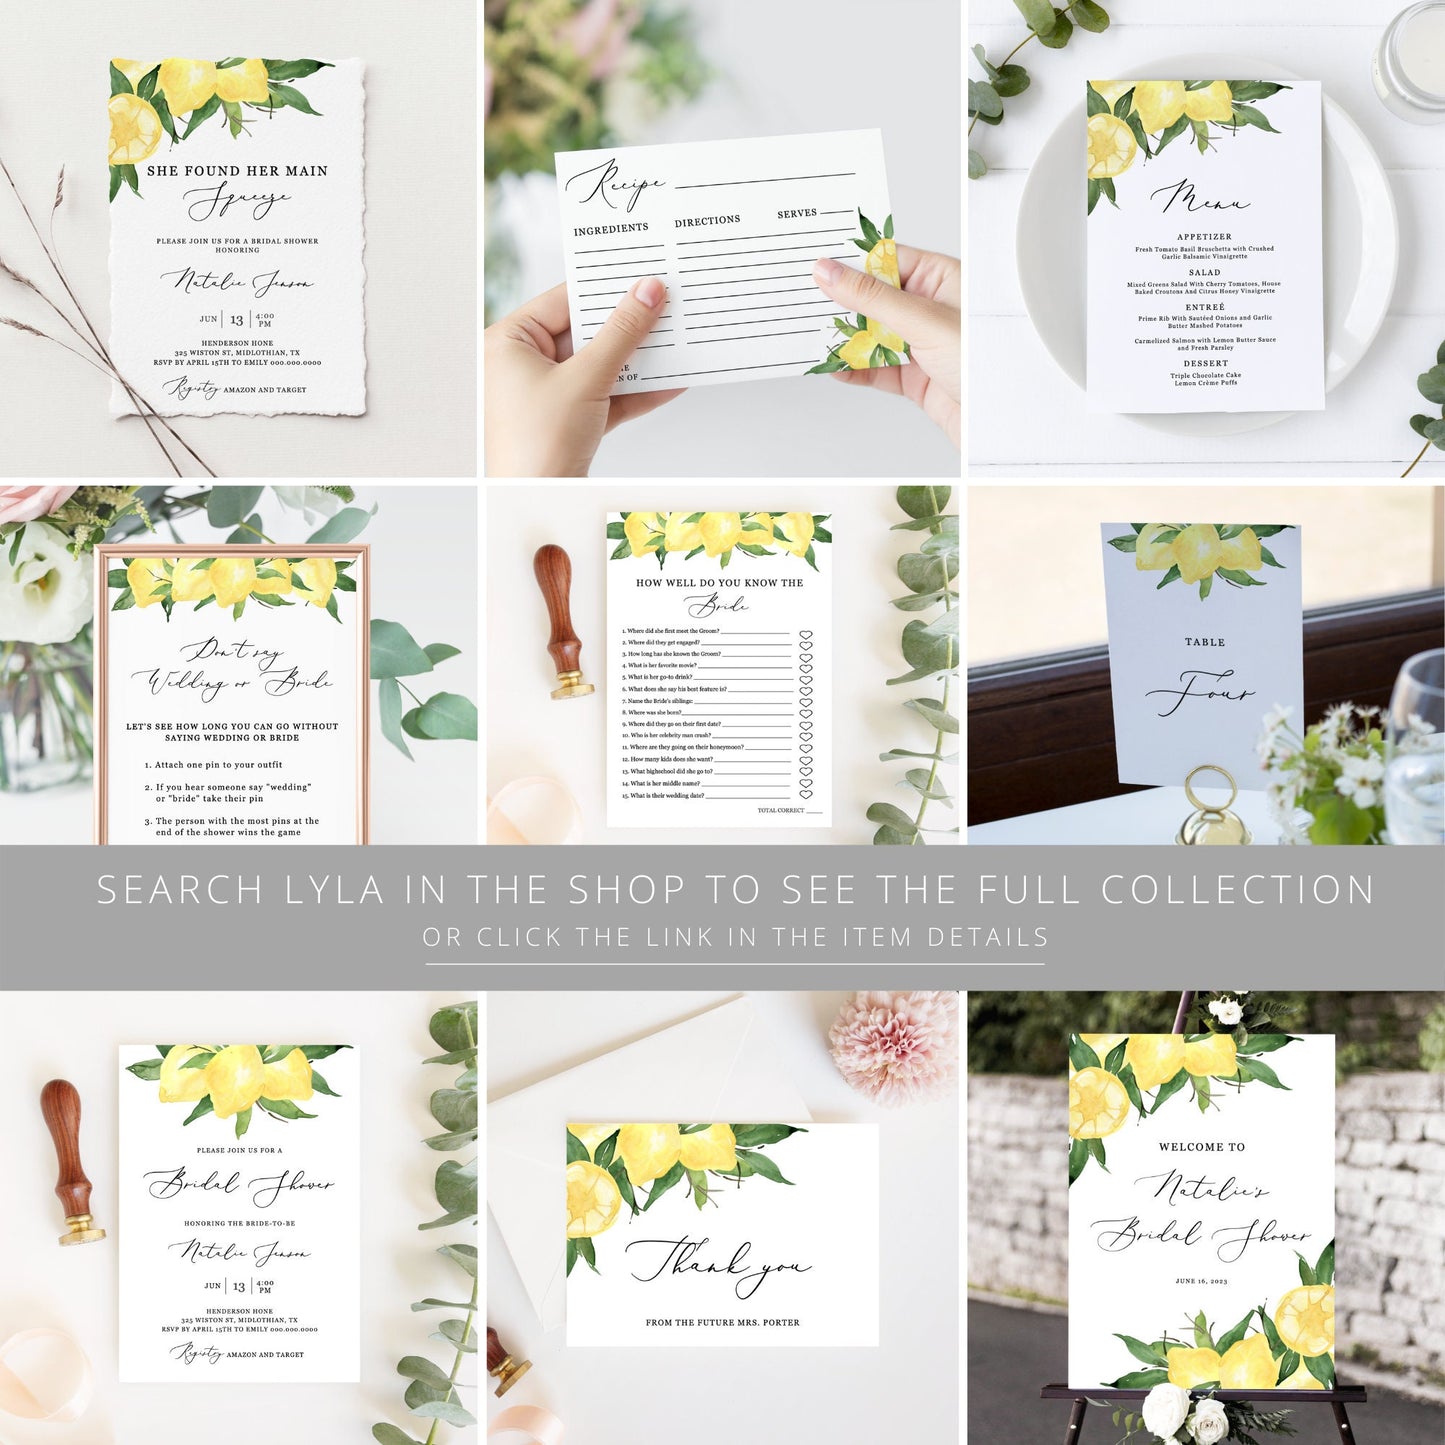 Editable Guestbook Sign Lemon Citrus Bridal Shower Sign Wedding Guestbook Sign 4x6 5x7 and 8x10 Template